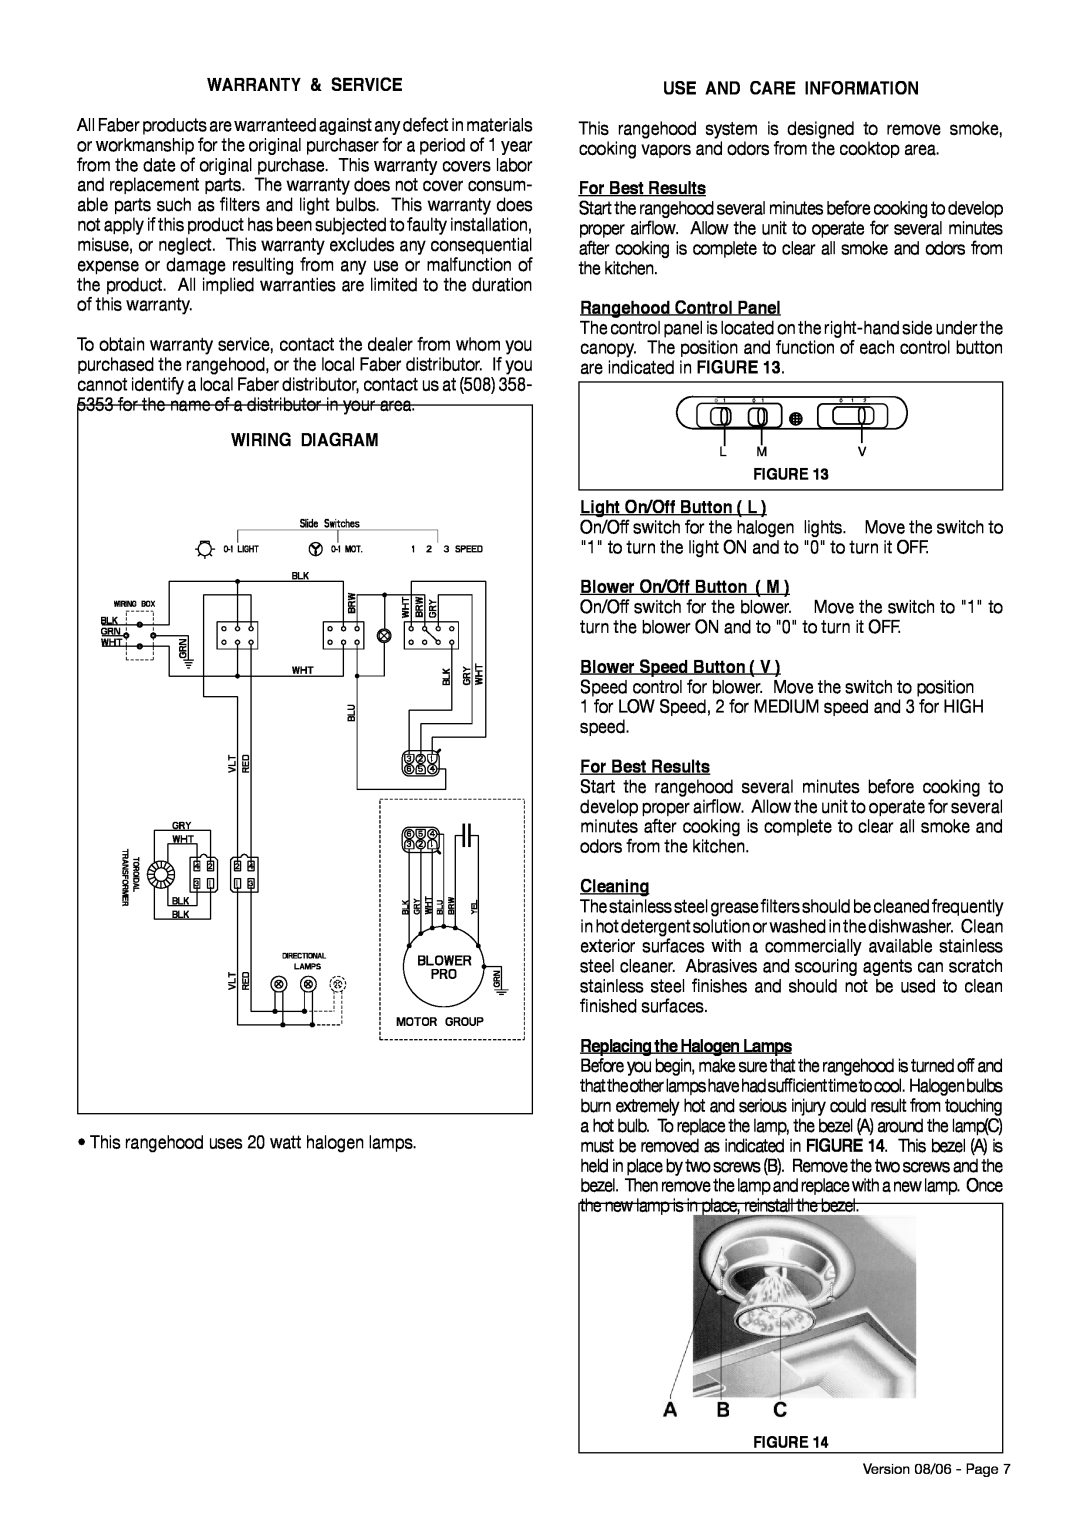 Faber Magnum Warranty & Service, Wiring Diagram, Use And Care Information, For Best Results, Rangehood Control Panel 